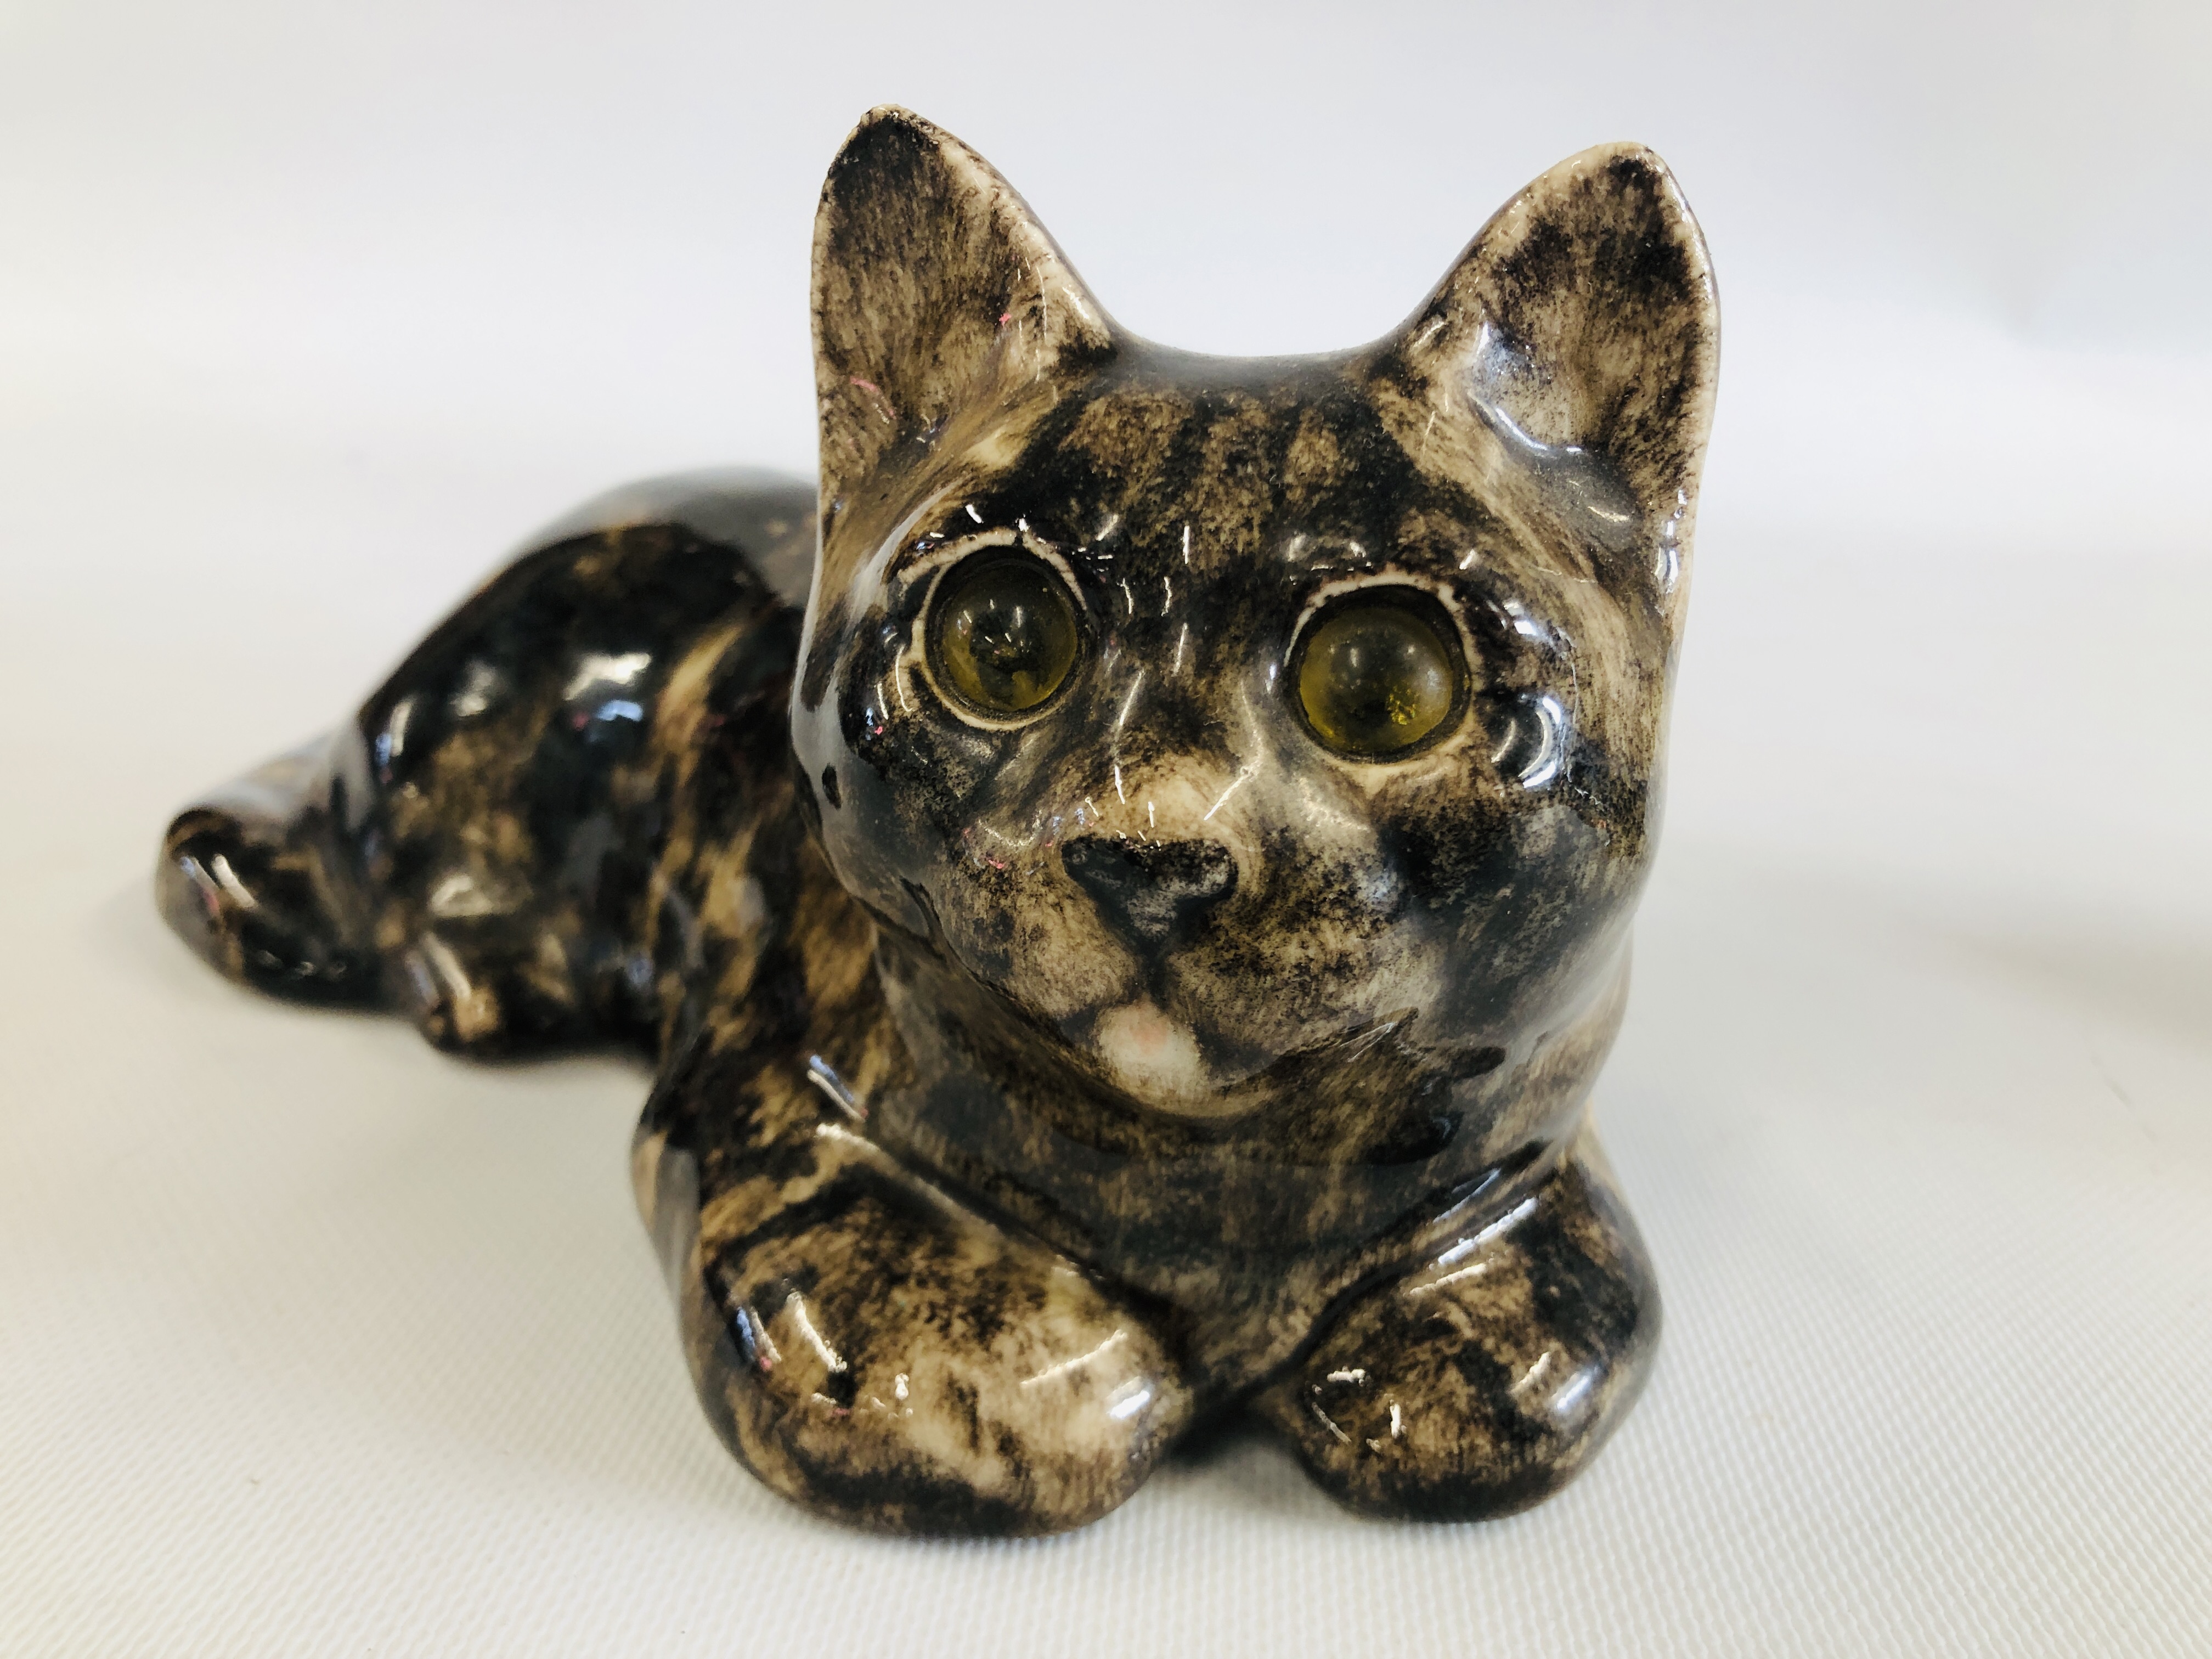 A WINSTANLEY POTTERY EXAMPLE OF A "SEATED" CAT BEARING SIGNATURE TO THE BASE, H 23. - Image 8 of 16